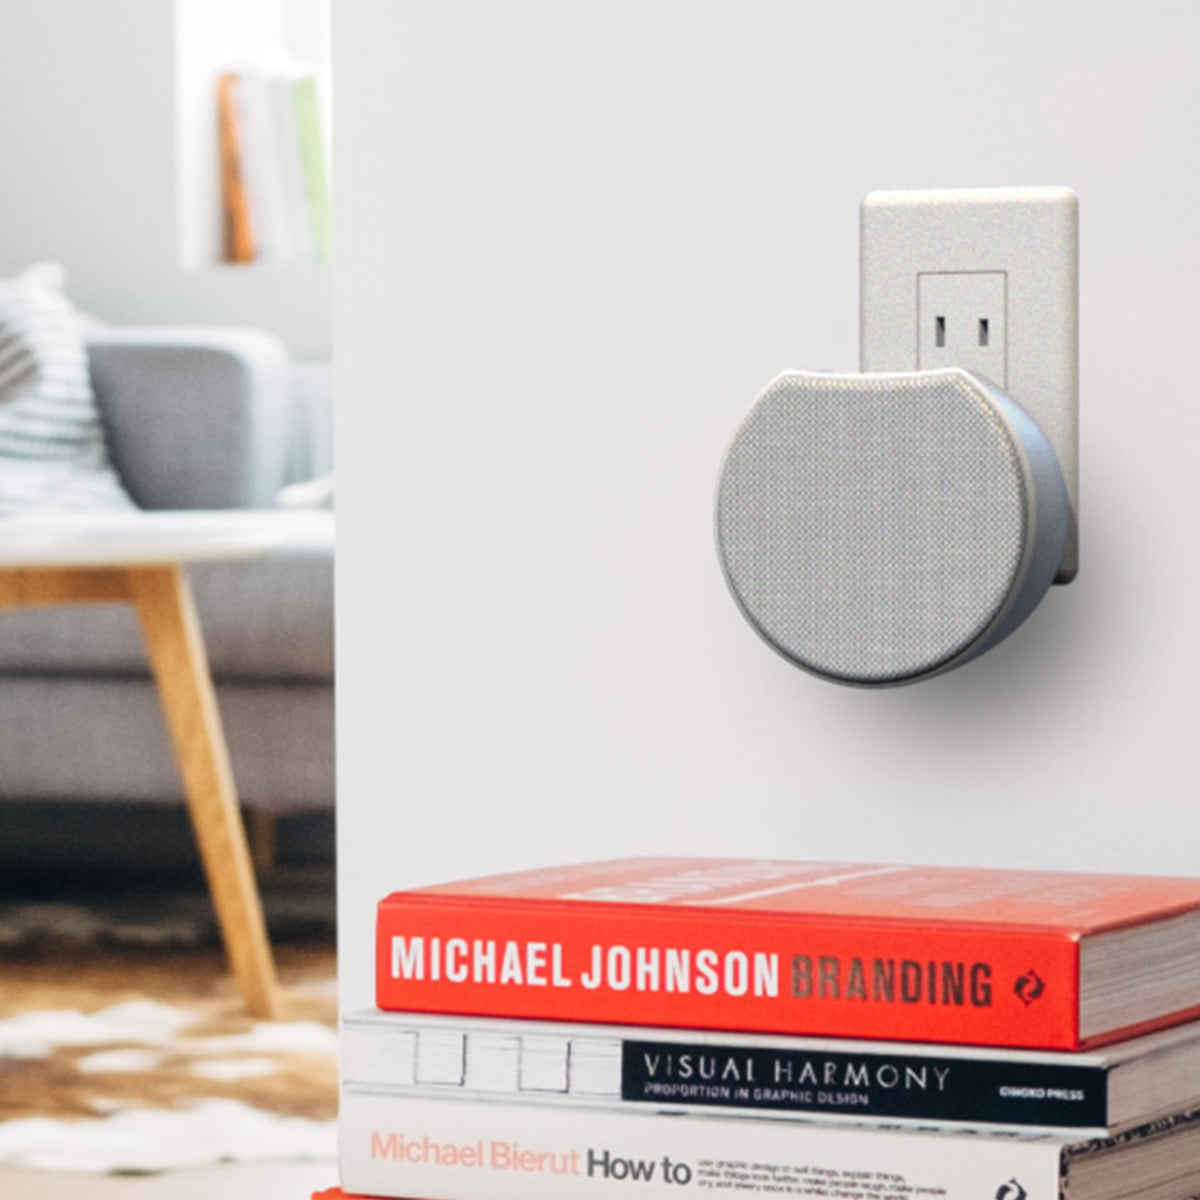 OC Acoustic Newport Plug-in Outlet Speaker with Bluetooth 5.1 and Built-in USB Type-A Charging Port - Set of 6 (Light Gray/White and Orange/Black)